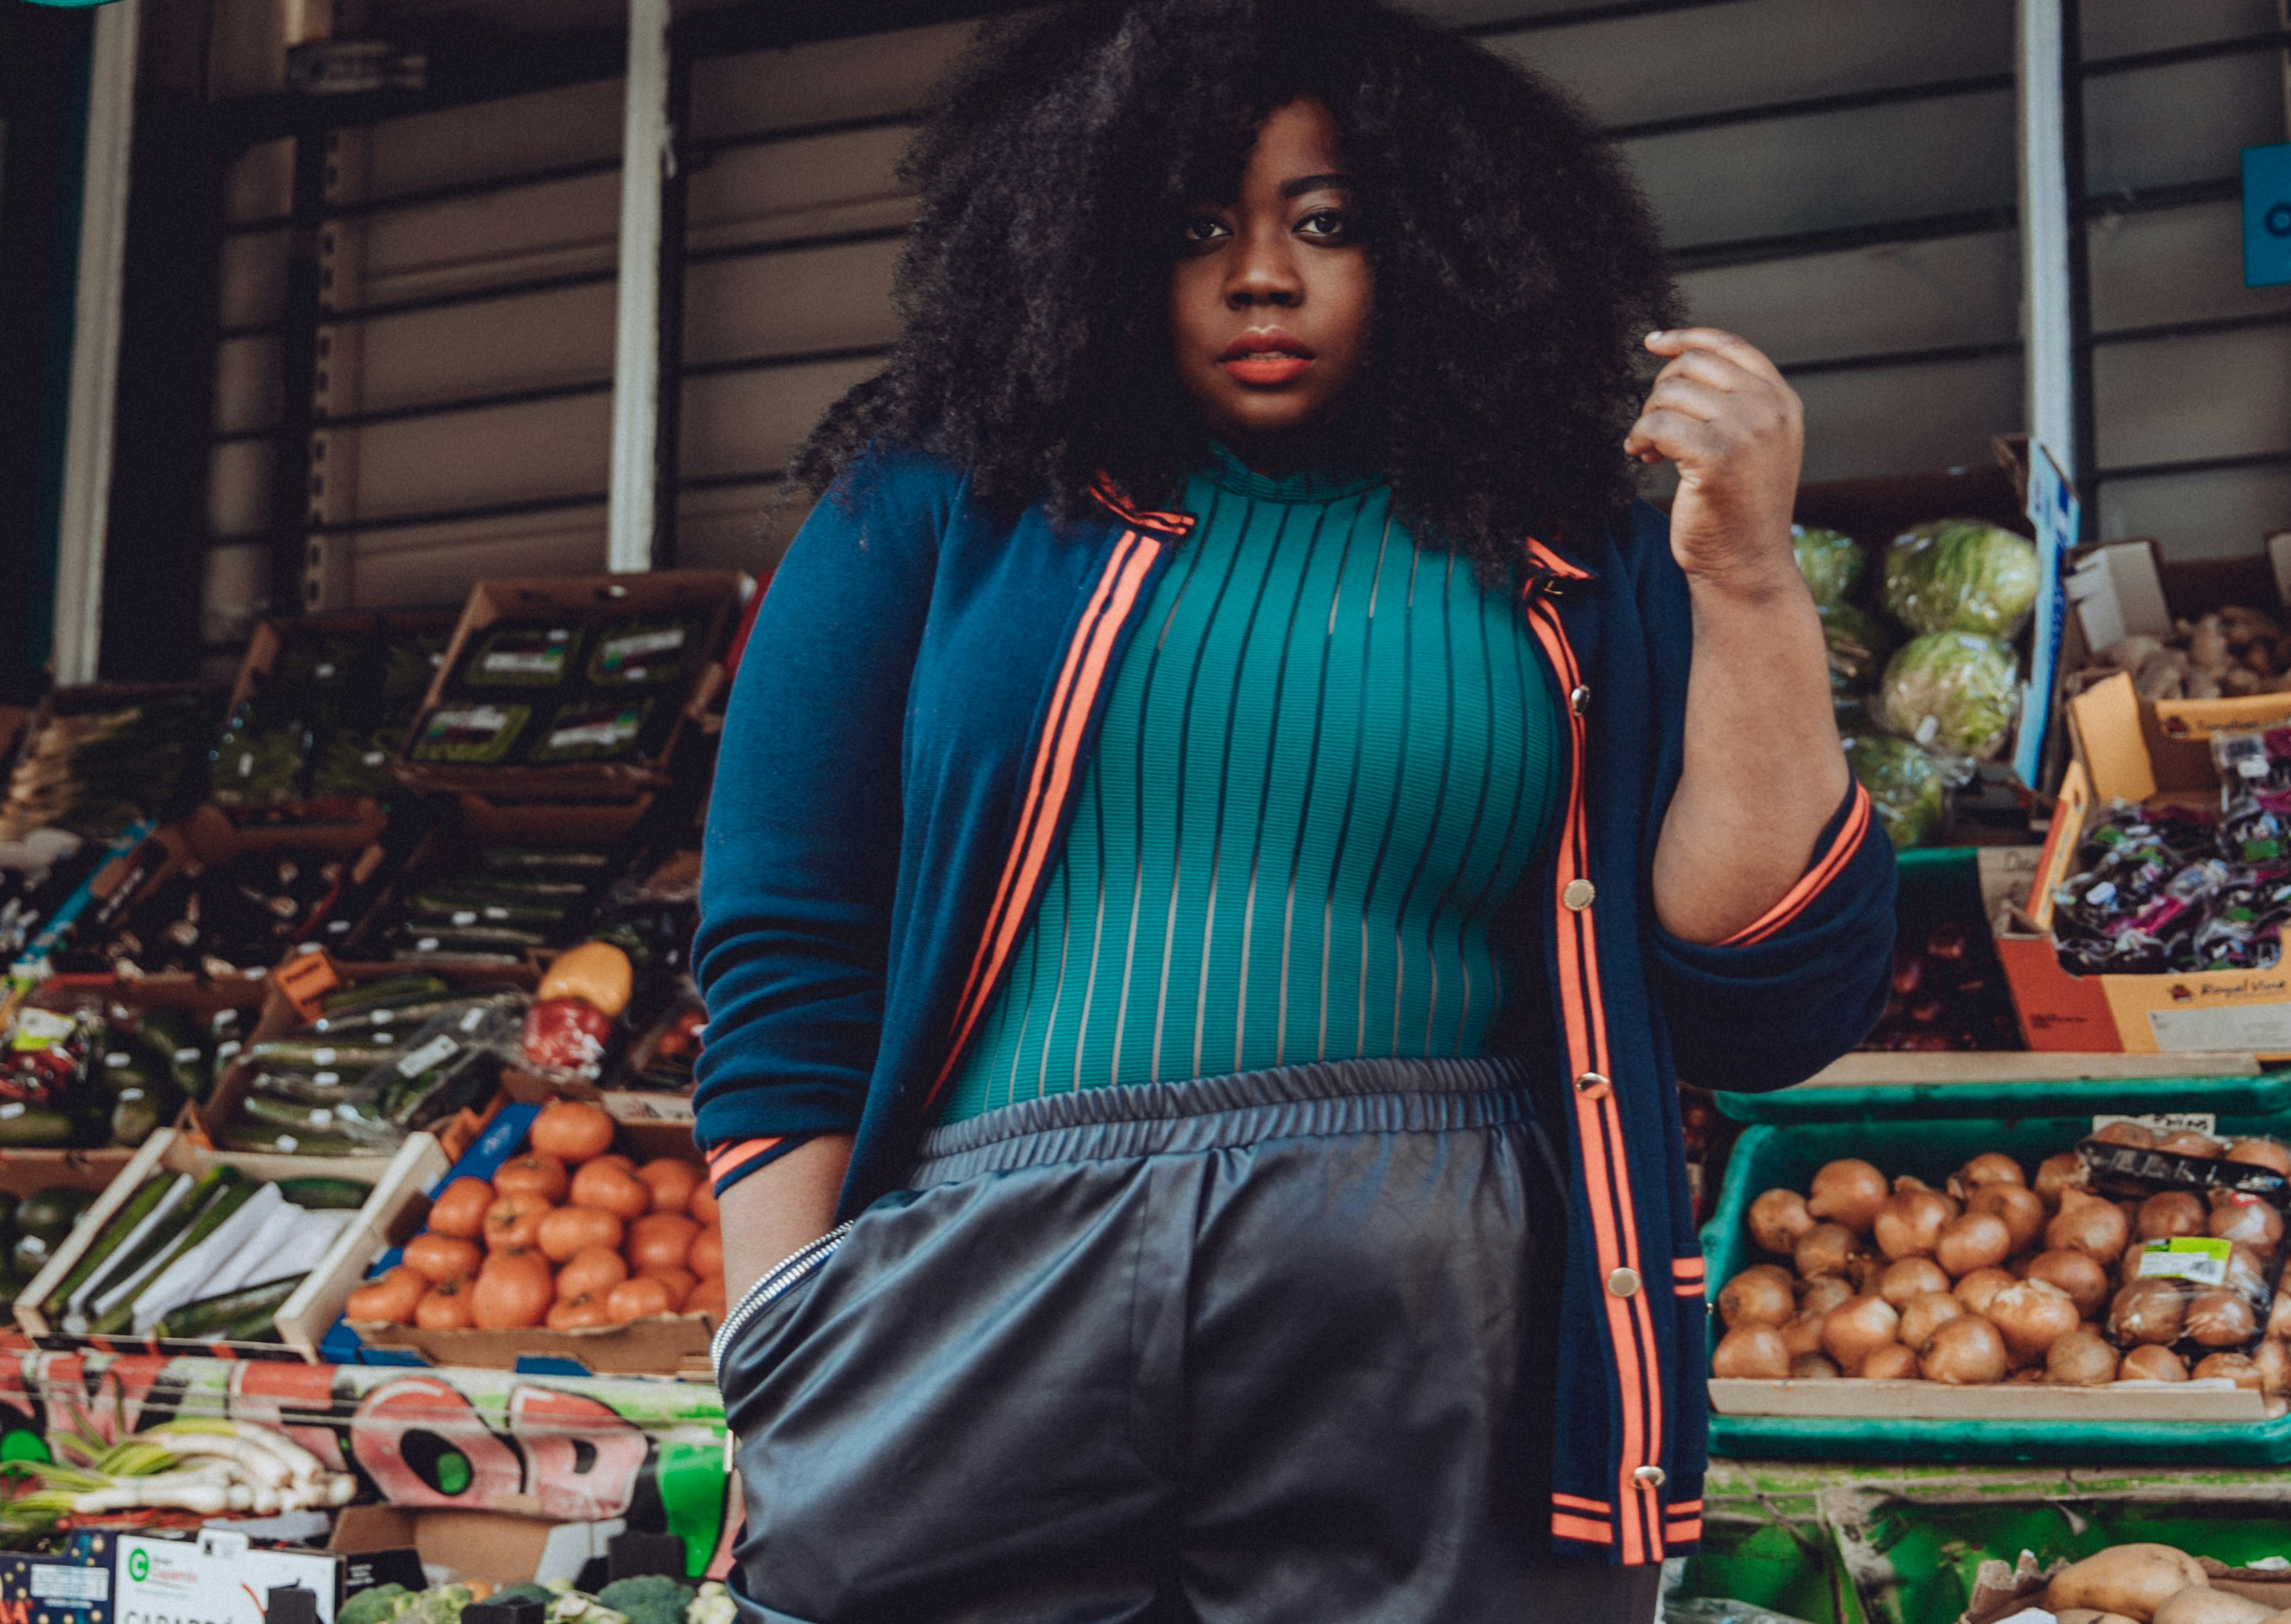 Stephanie Yeboah poses in front of a market stall in a green top and blue cardigan.